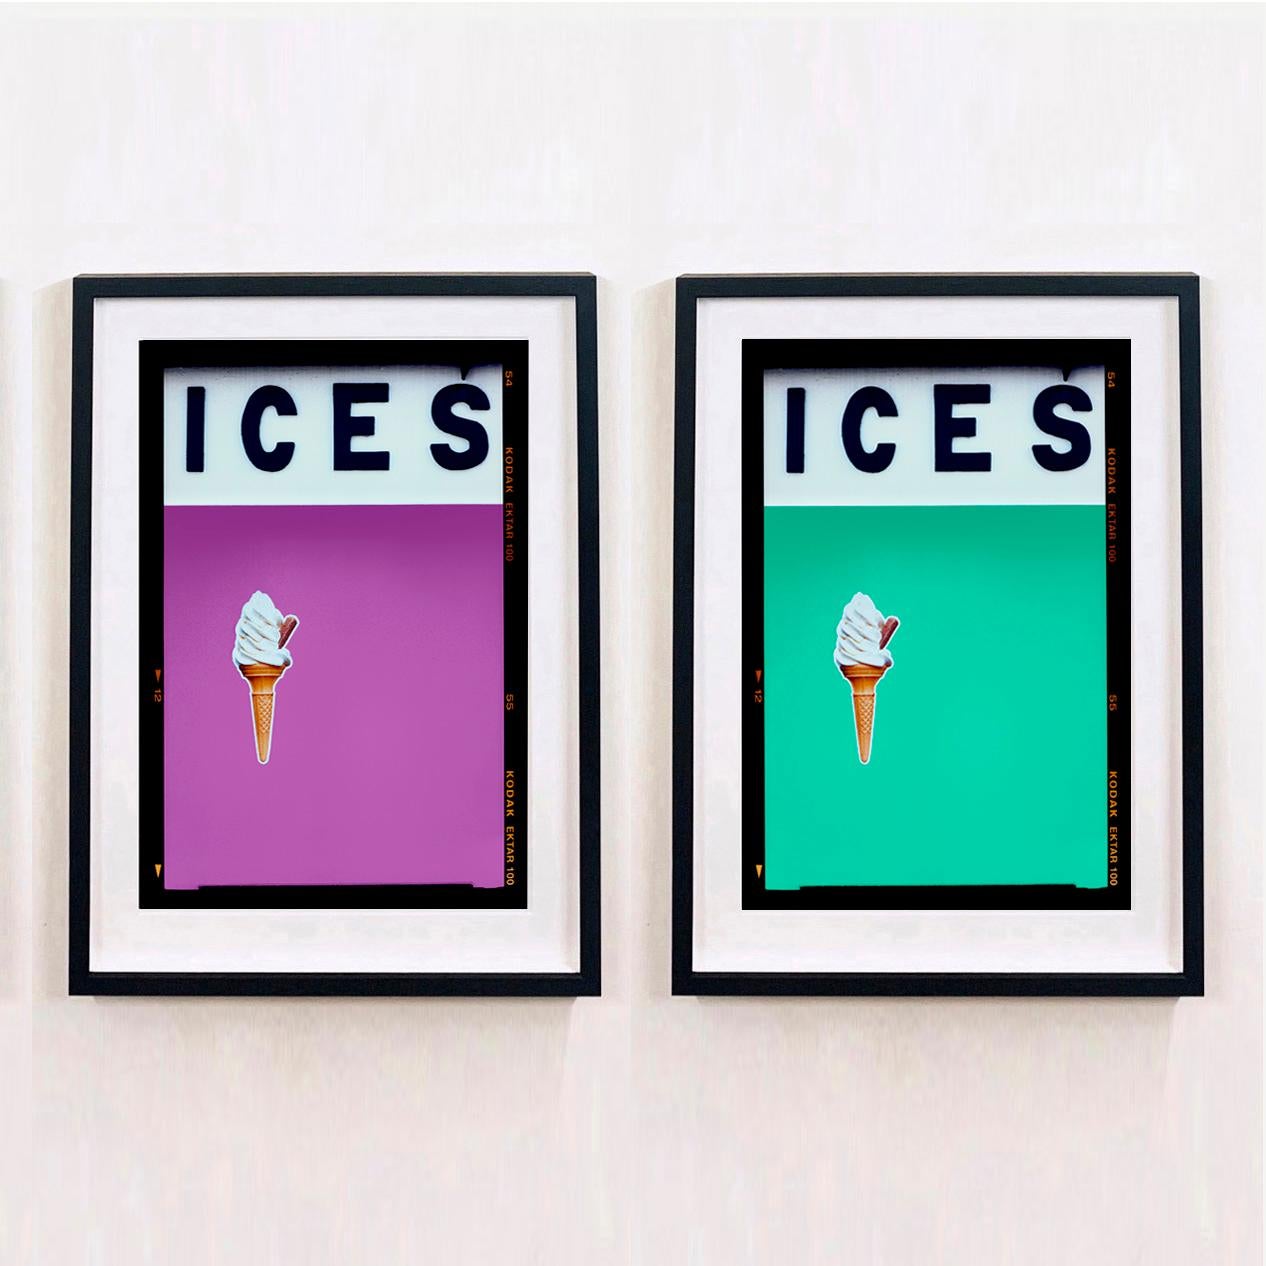 ICES, by Richard Heeps, photographed at the British Seaside at the end of summer 2020. This artwork is about evoking memories of the simple joy of days by the beach. The plum purple color blocking, typography and the surreal twist of the suspended